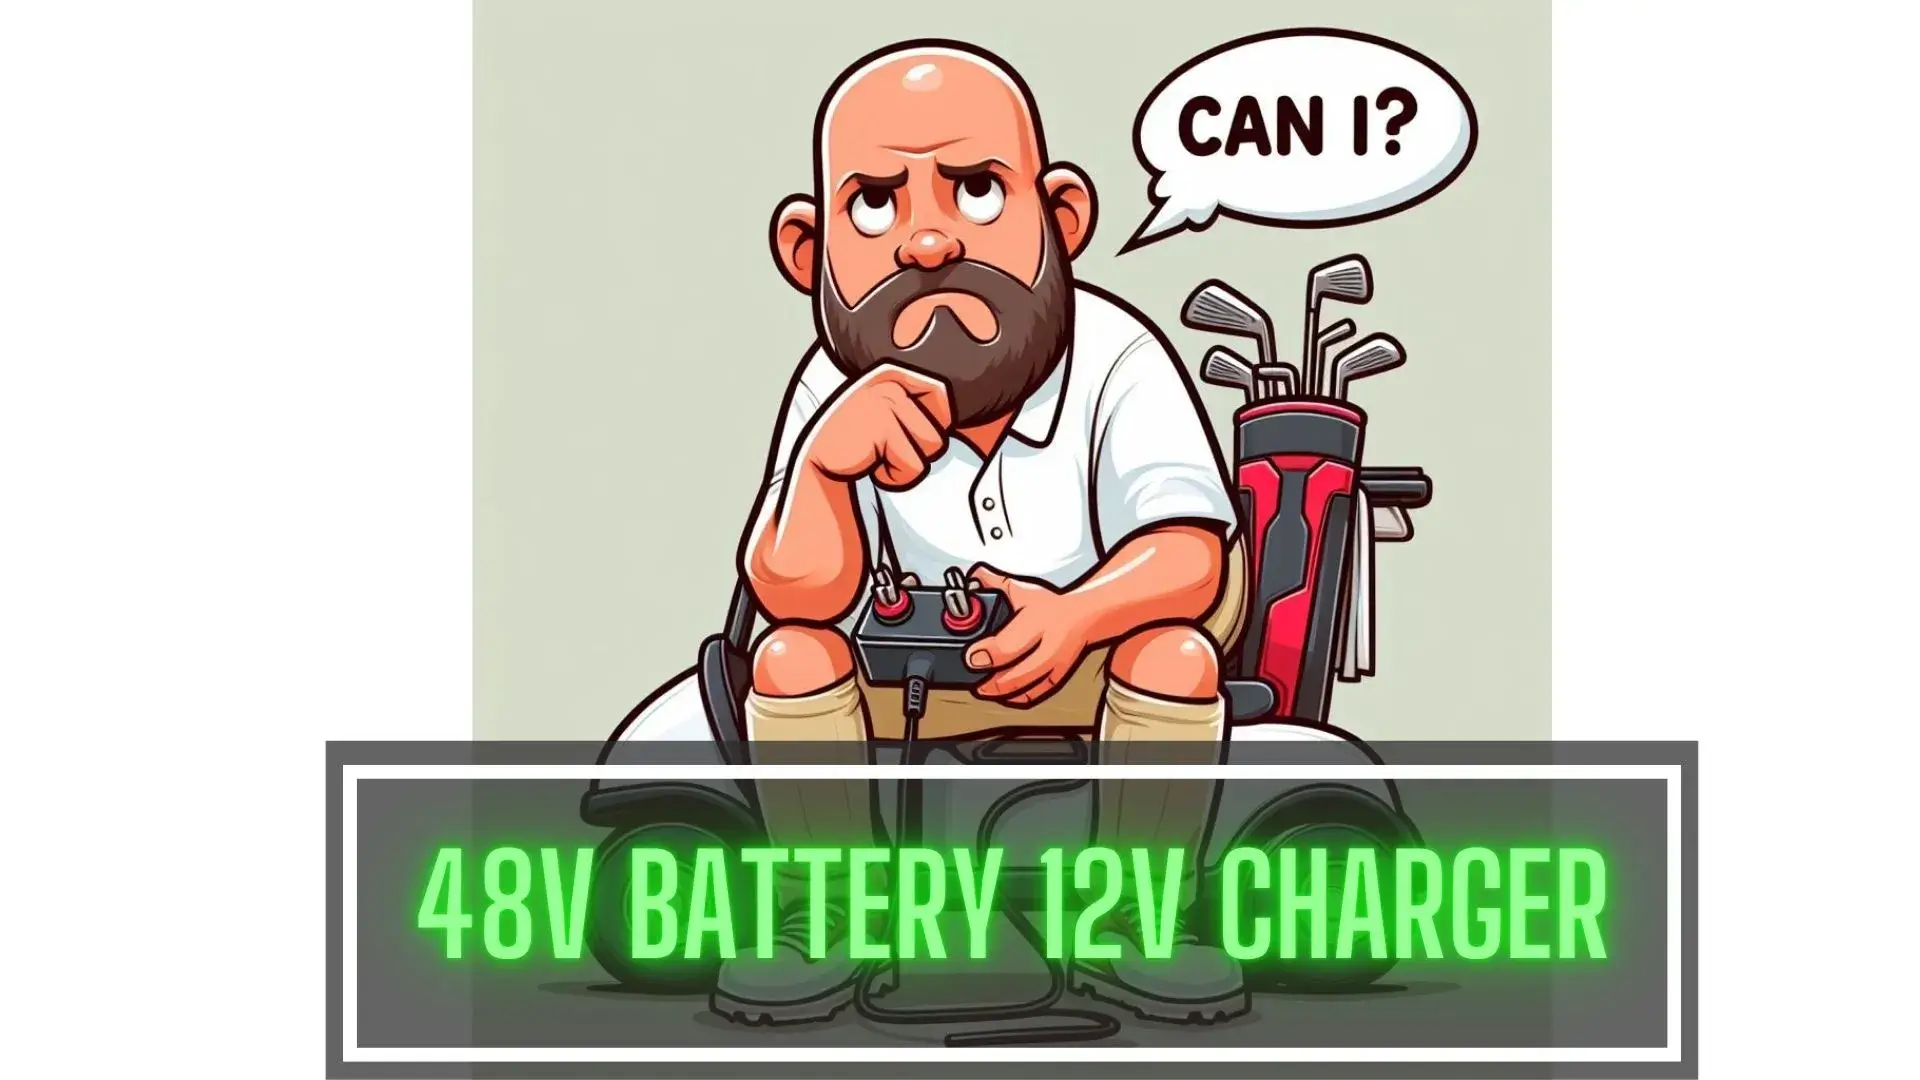 Can You charge a 48-volt battery with a 12-volt charger